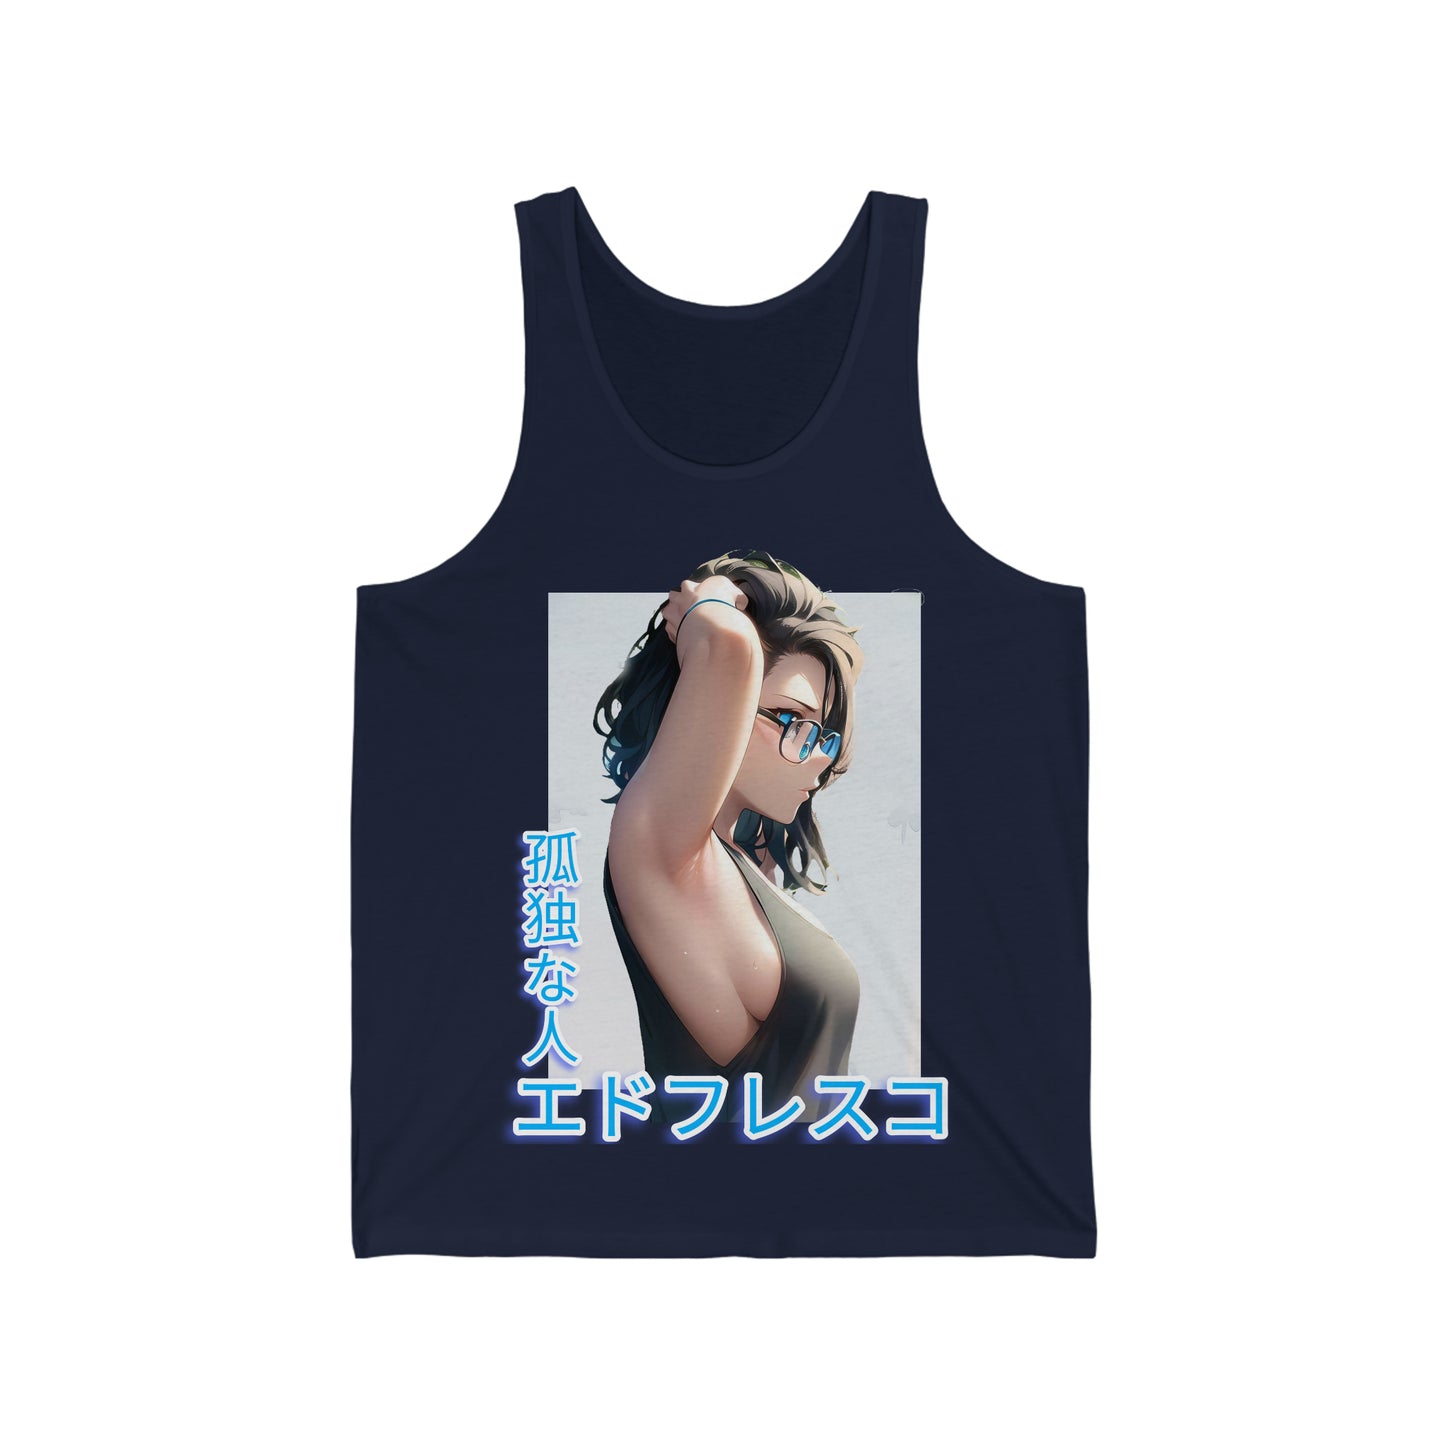 Anime Style Art Unisex Jersey Tank- "Front Cover Chick"